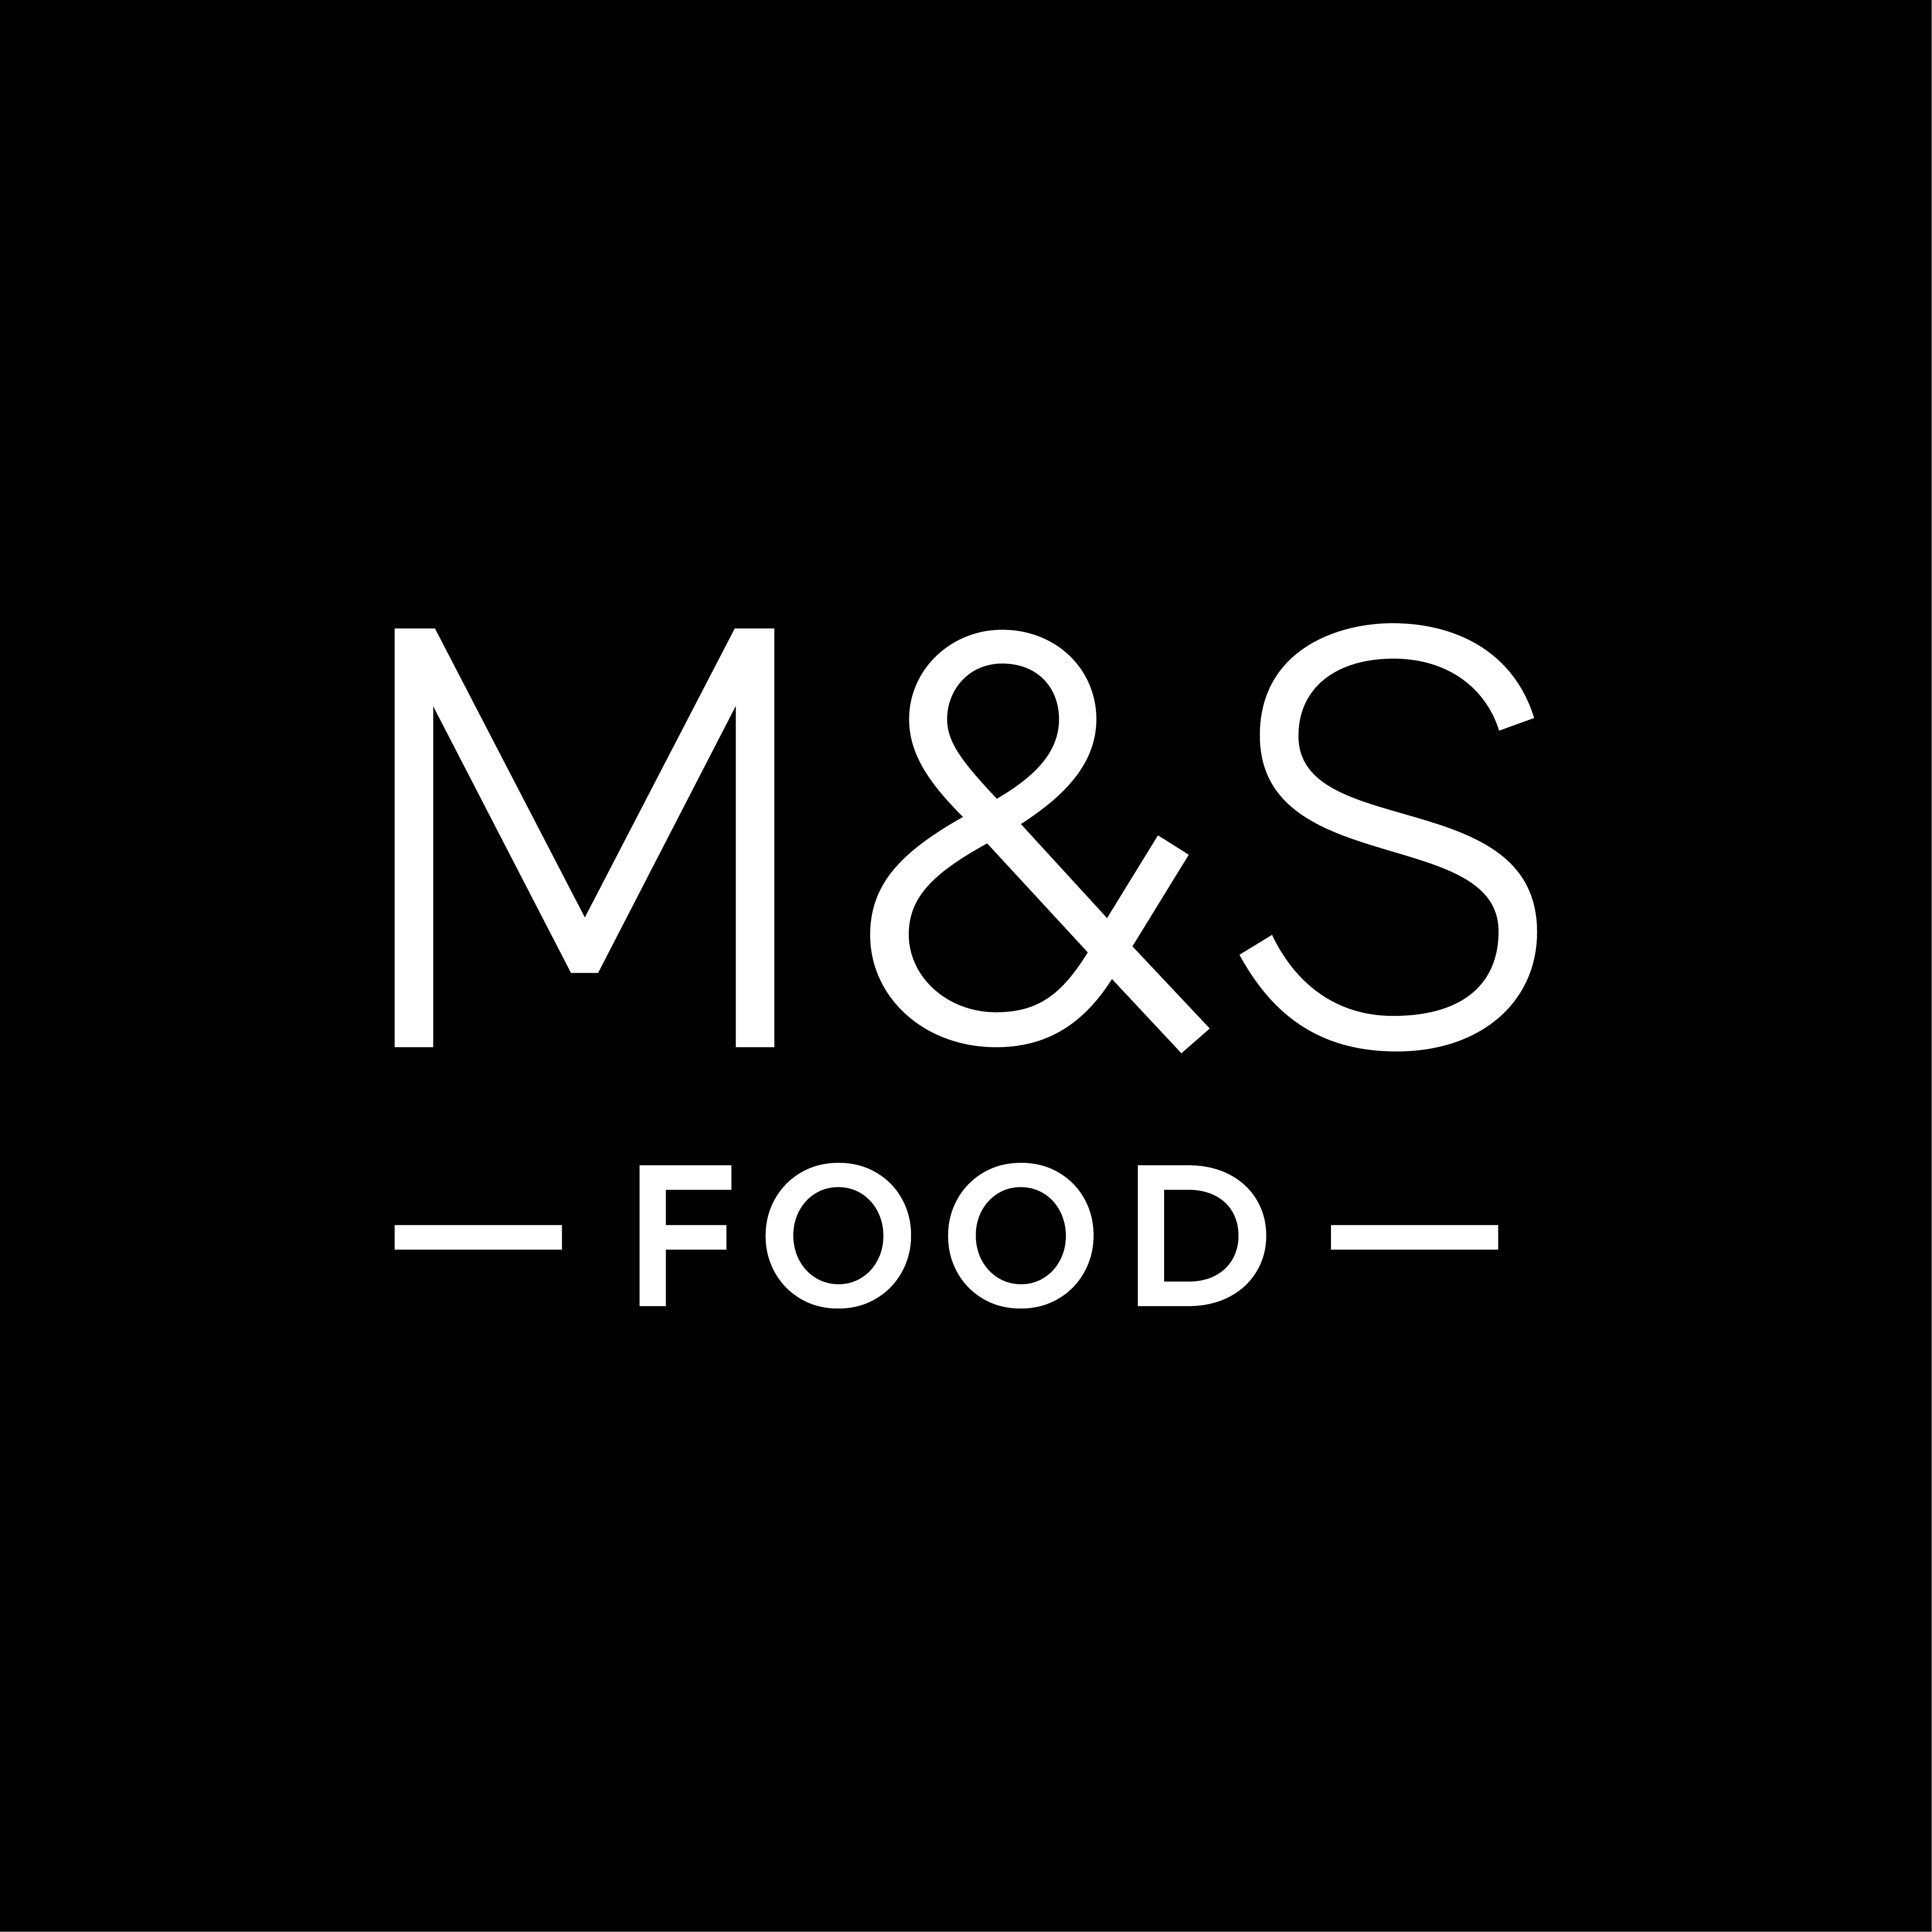 Logo reads 'M&S Food' in white font on a black background.